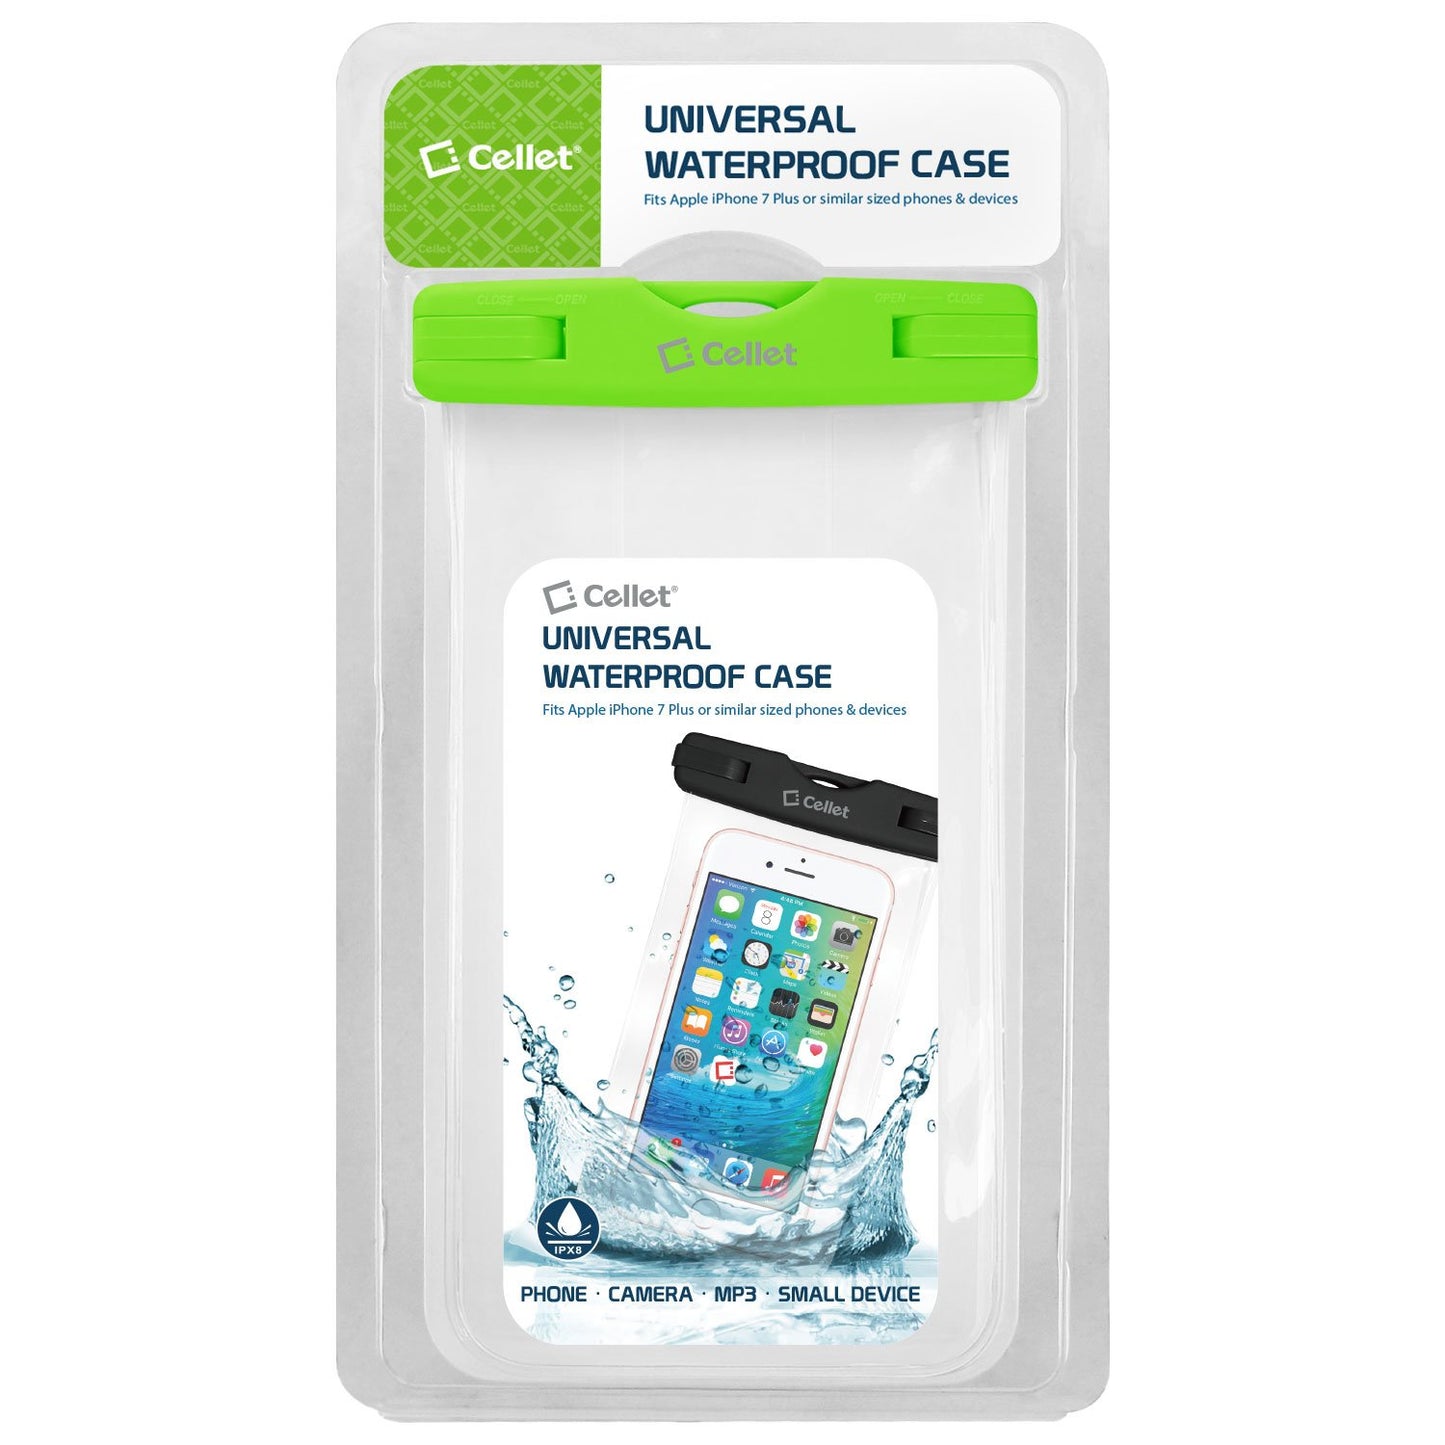 WATER1GR - Cellet Universal IPX8 Waterproof Case for Apple iPhone 7 Plus, Digital Cameras, MP3 Players and More - Green